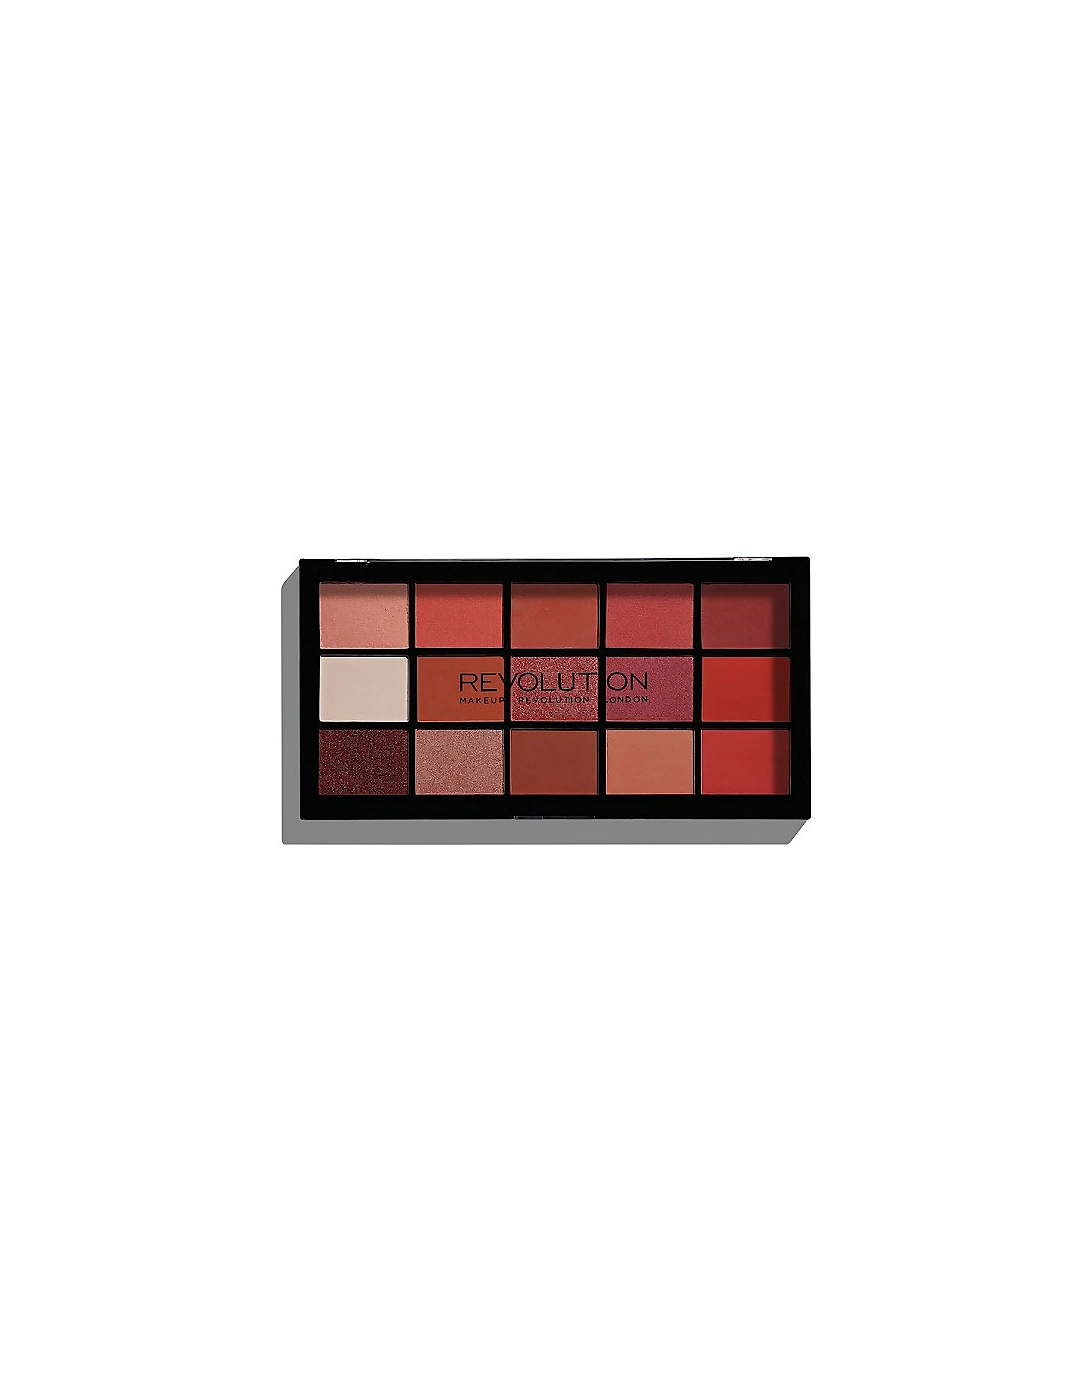 Makeup Reloaded Eye Shadow Palette - Newtrals 2, 2 of 1